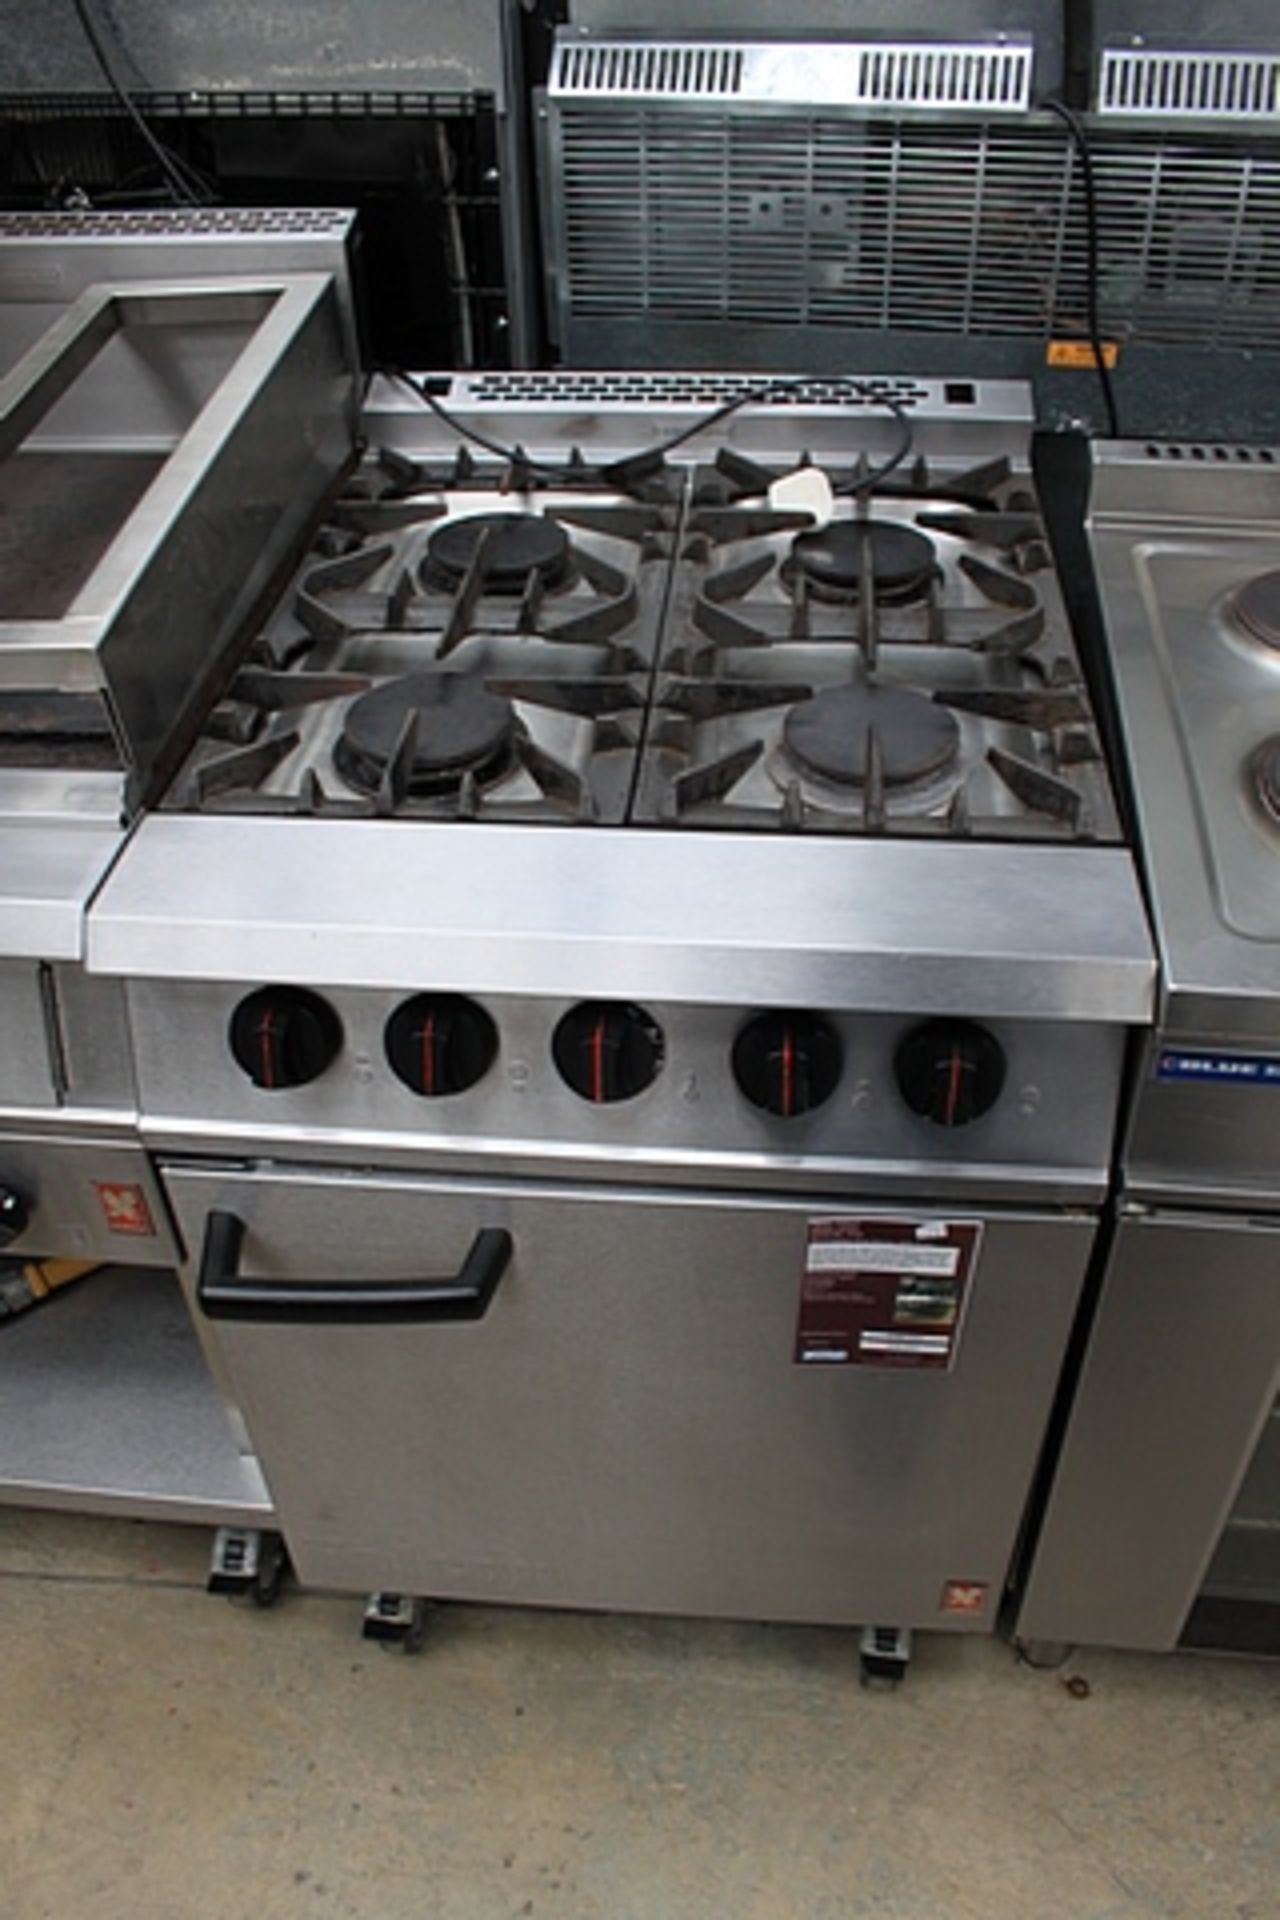 Falcon G2161 4 Gas Burner With Oven Stainless Steel The Falcon open top range is equipped with